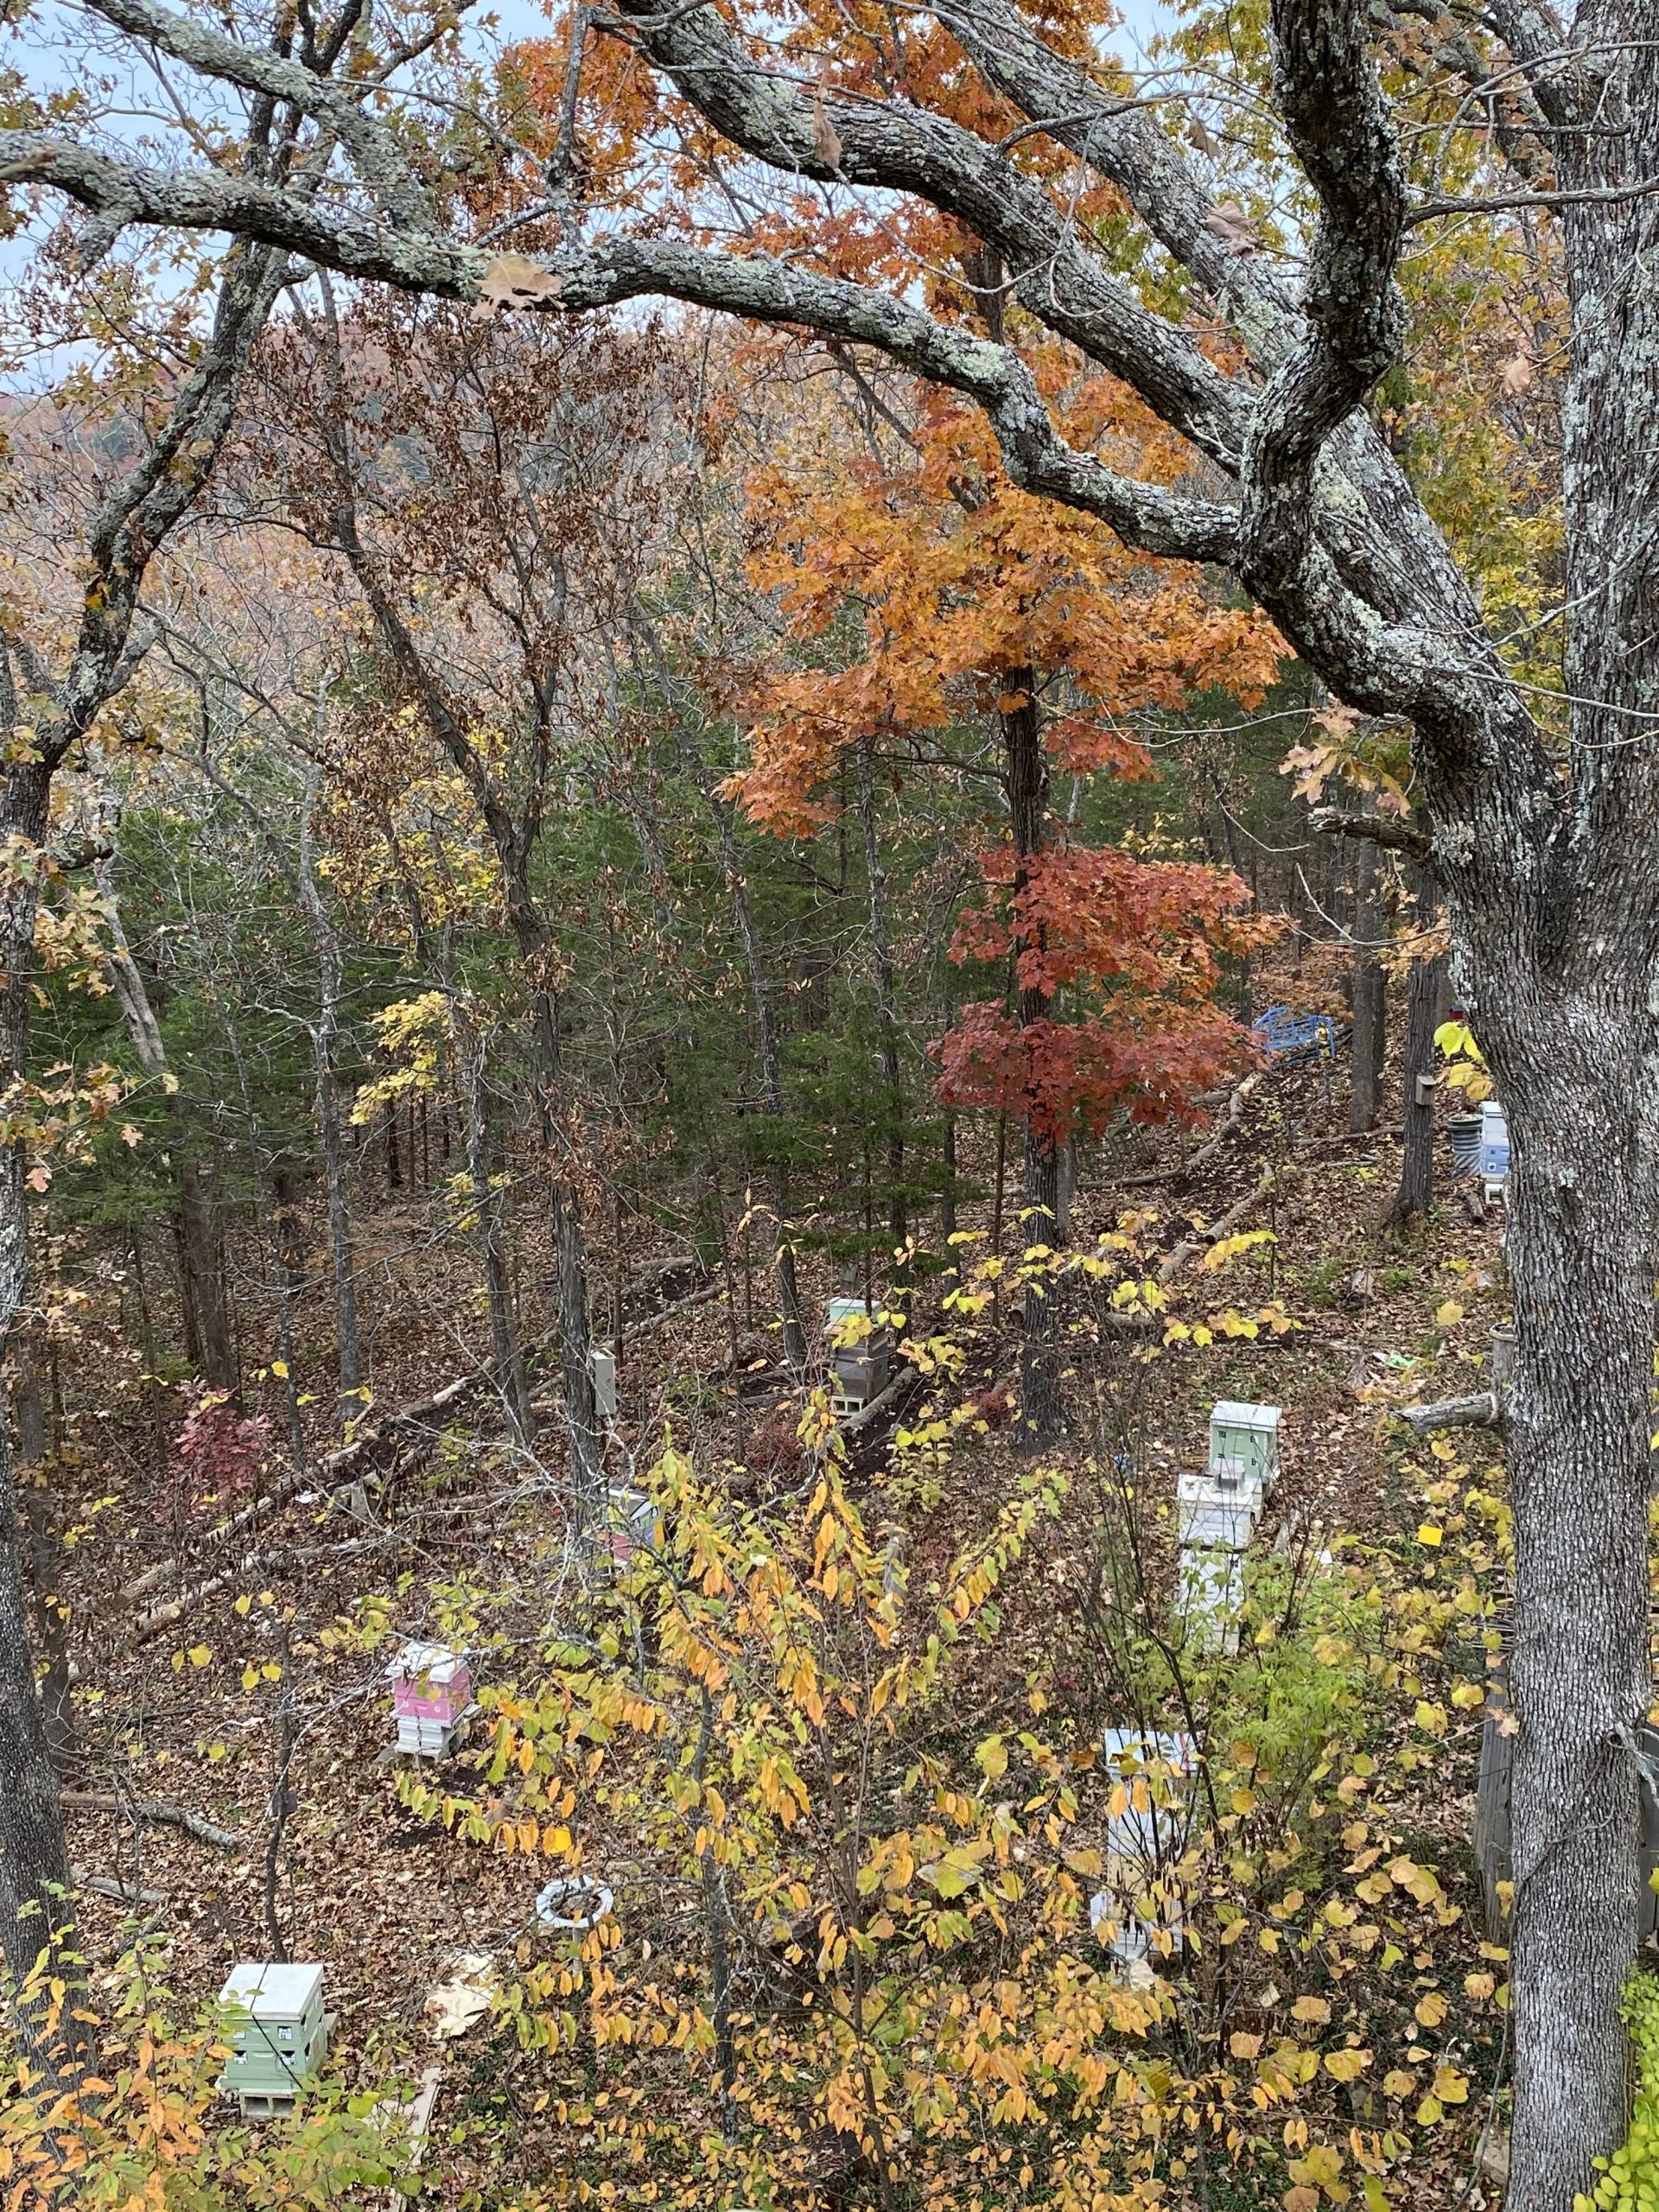 North Apiary in the fall:
Image Courtesy of Charlotte Ekker Wiggins